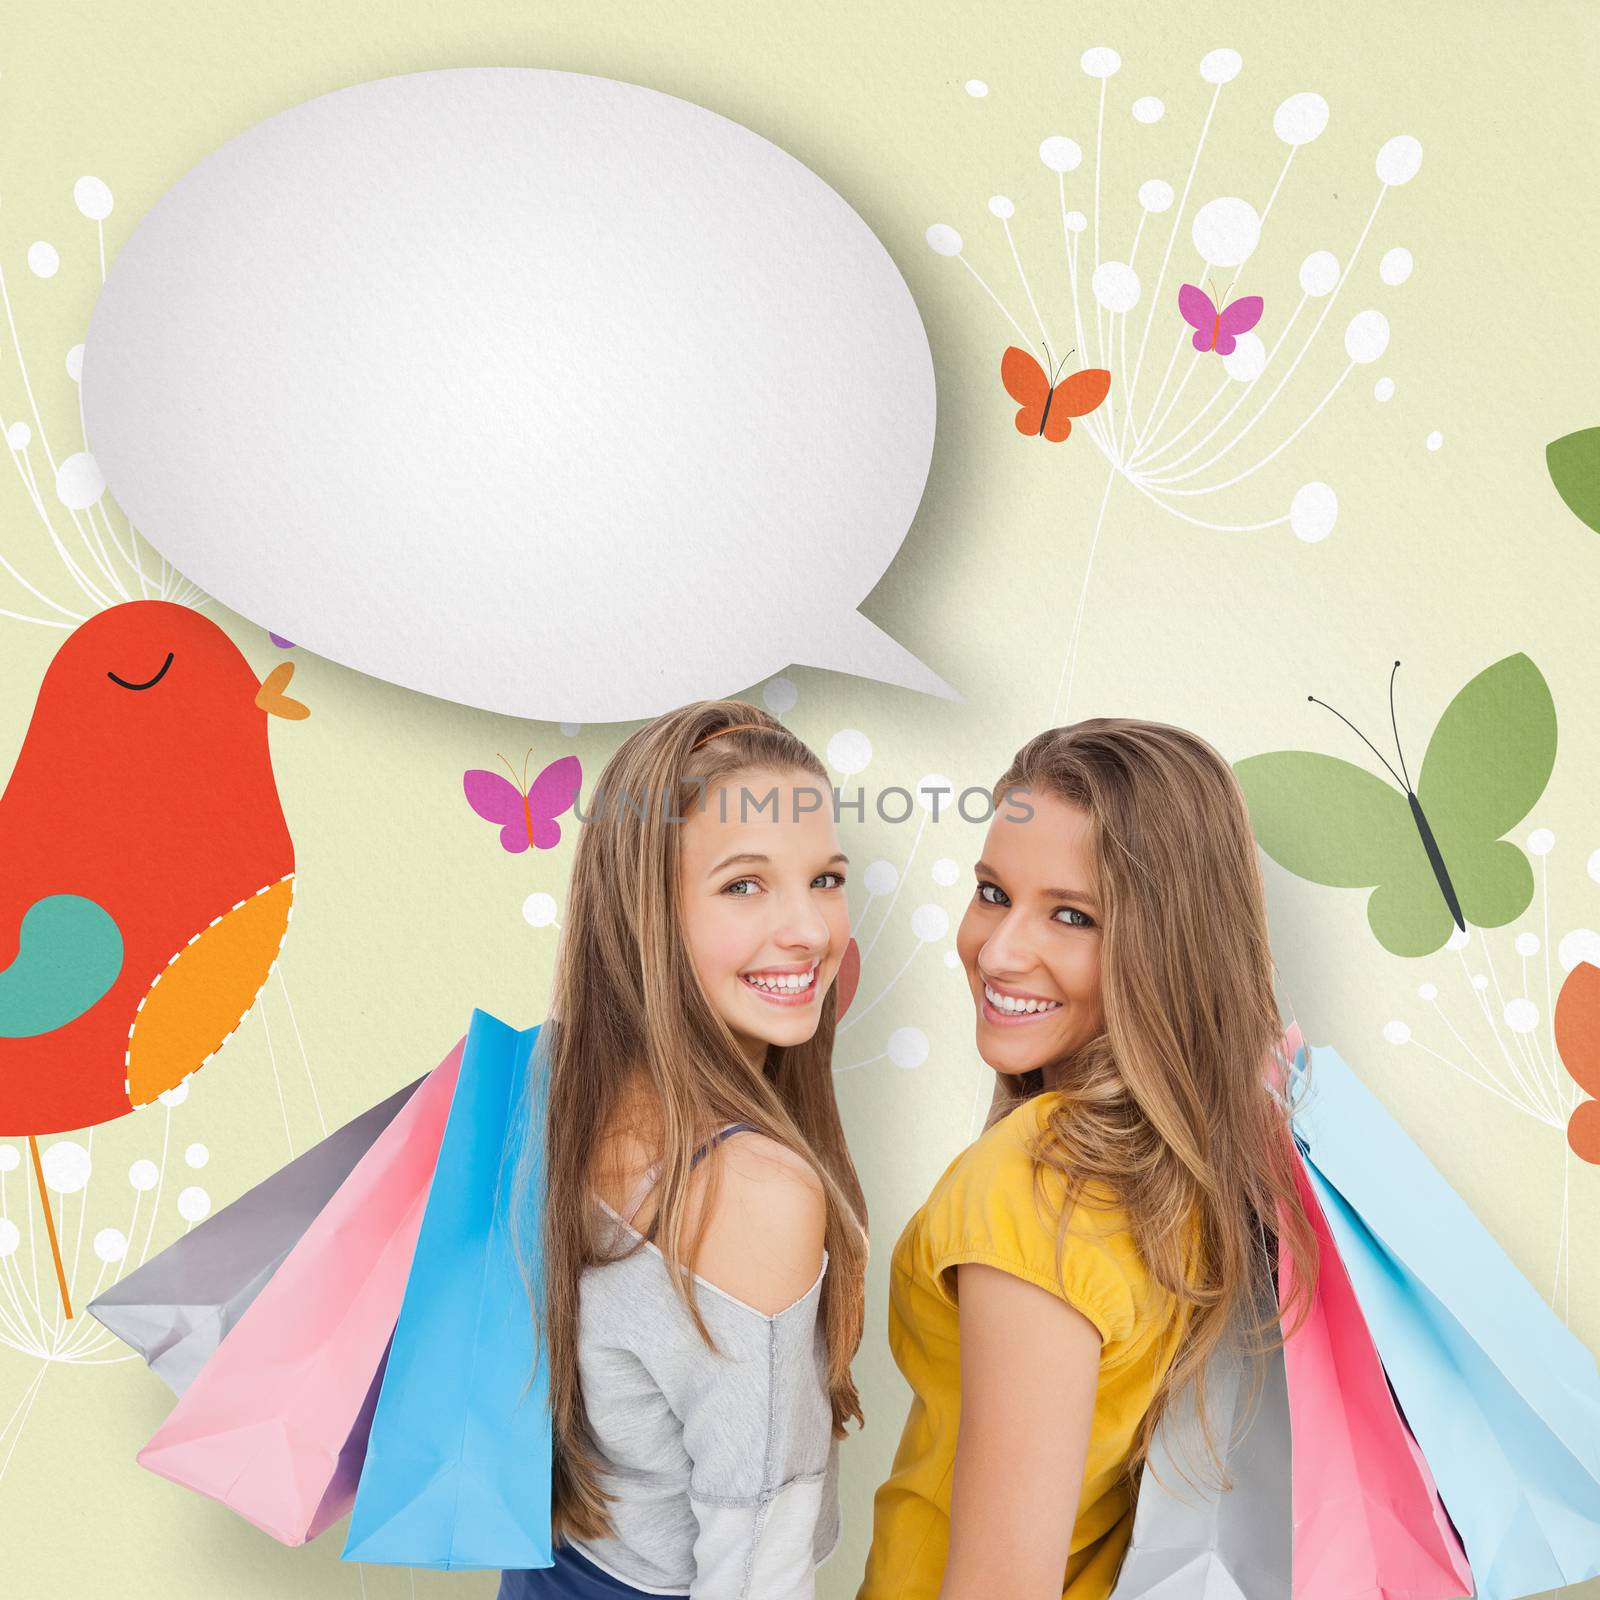 Two young women with shopping bags with speech bubble against orange bird with heart and dandelions